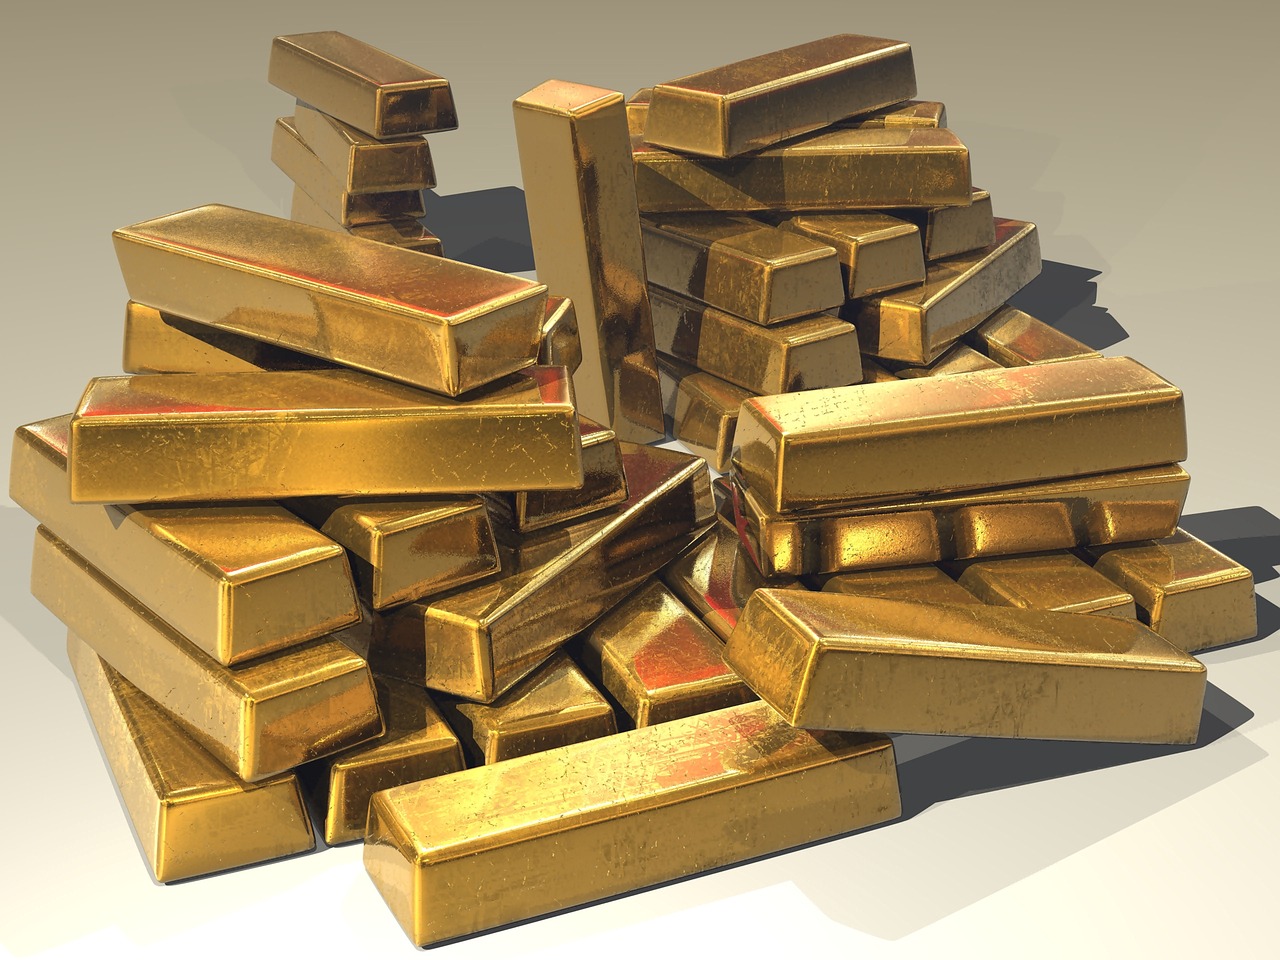 Gold standard bars are traded on the LBMA